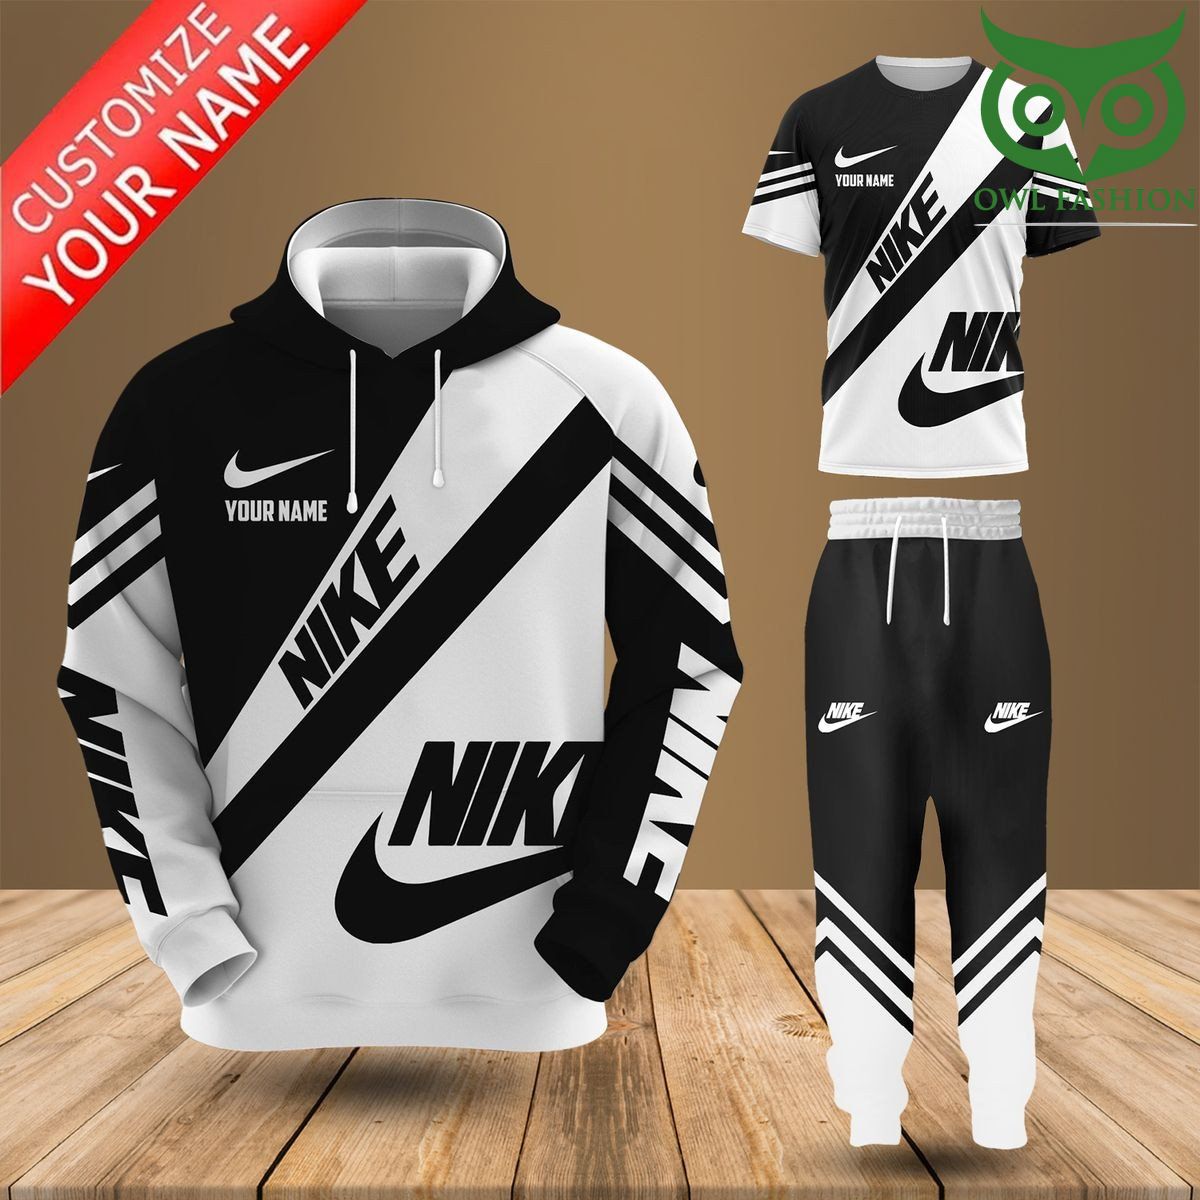 Personalized Nike black and white hoodies T-Shirt and sweatpants